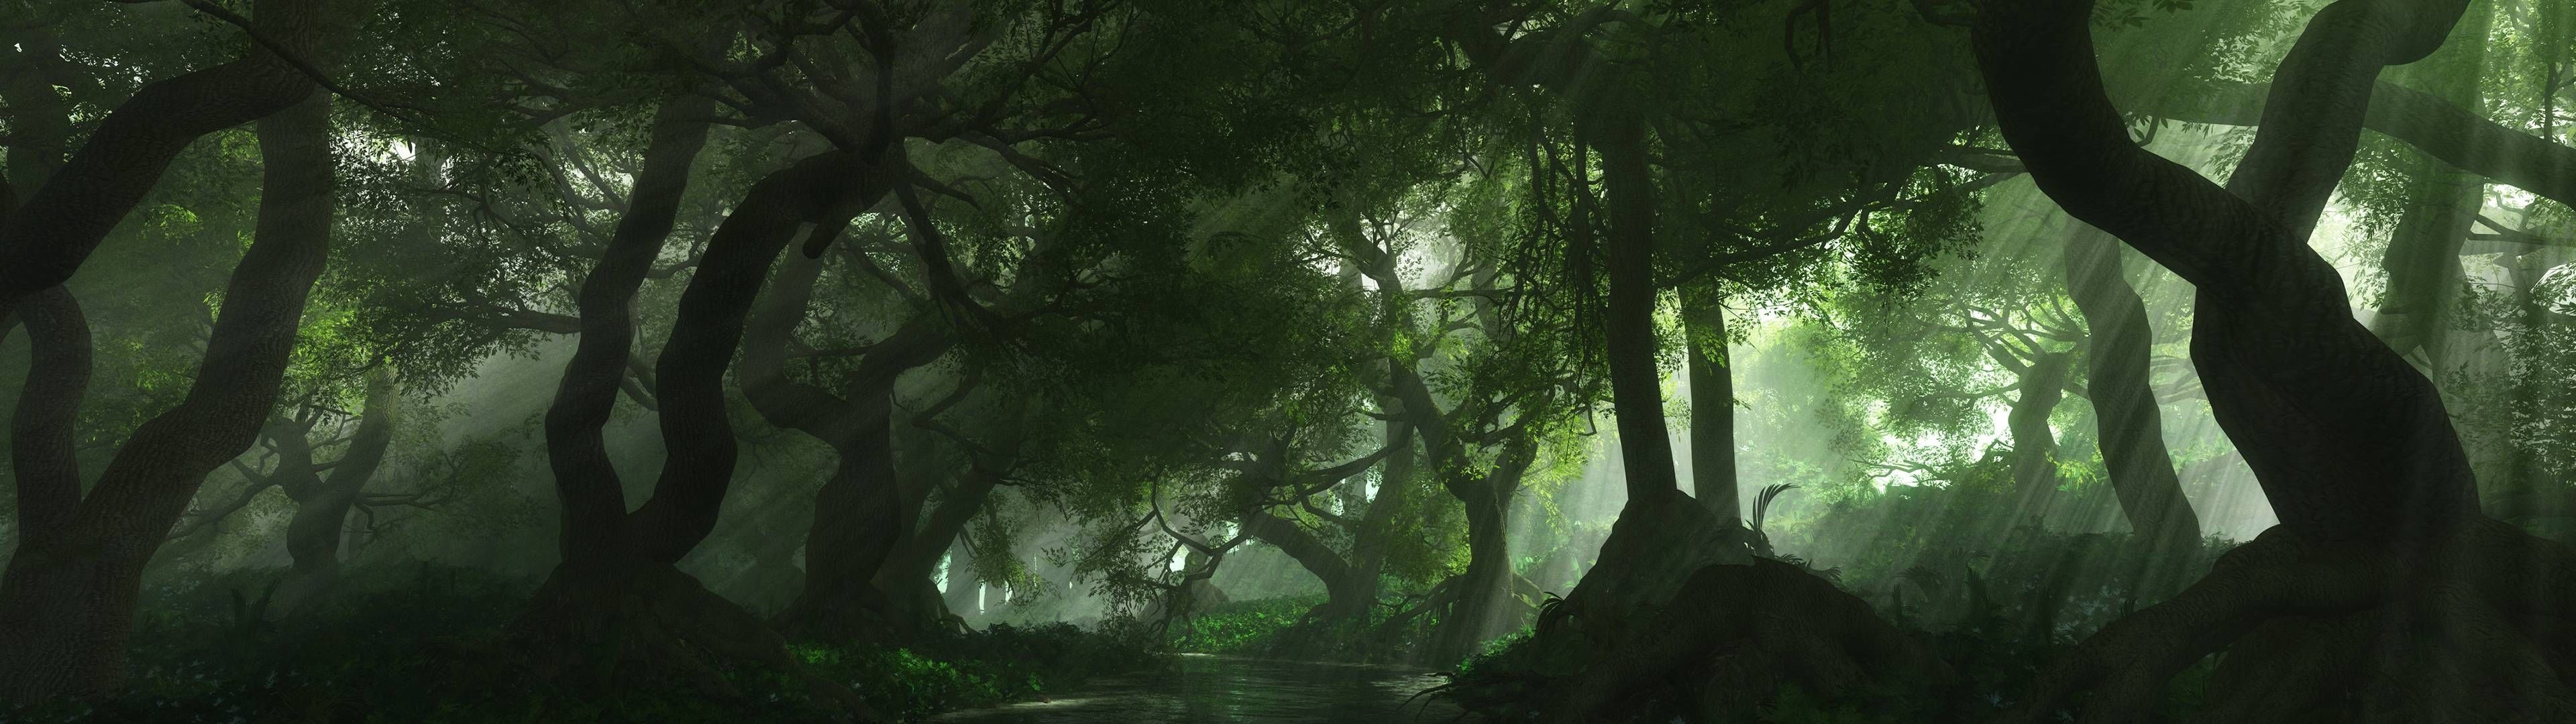 Green Forest: A tree on the side of a green hill, The view of a foggy lake near the peak of the mountain. 3840x1080 Dual Screen Wallpaper.